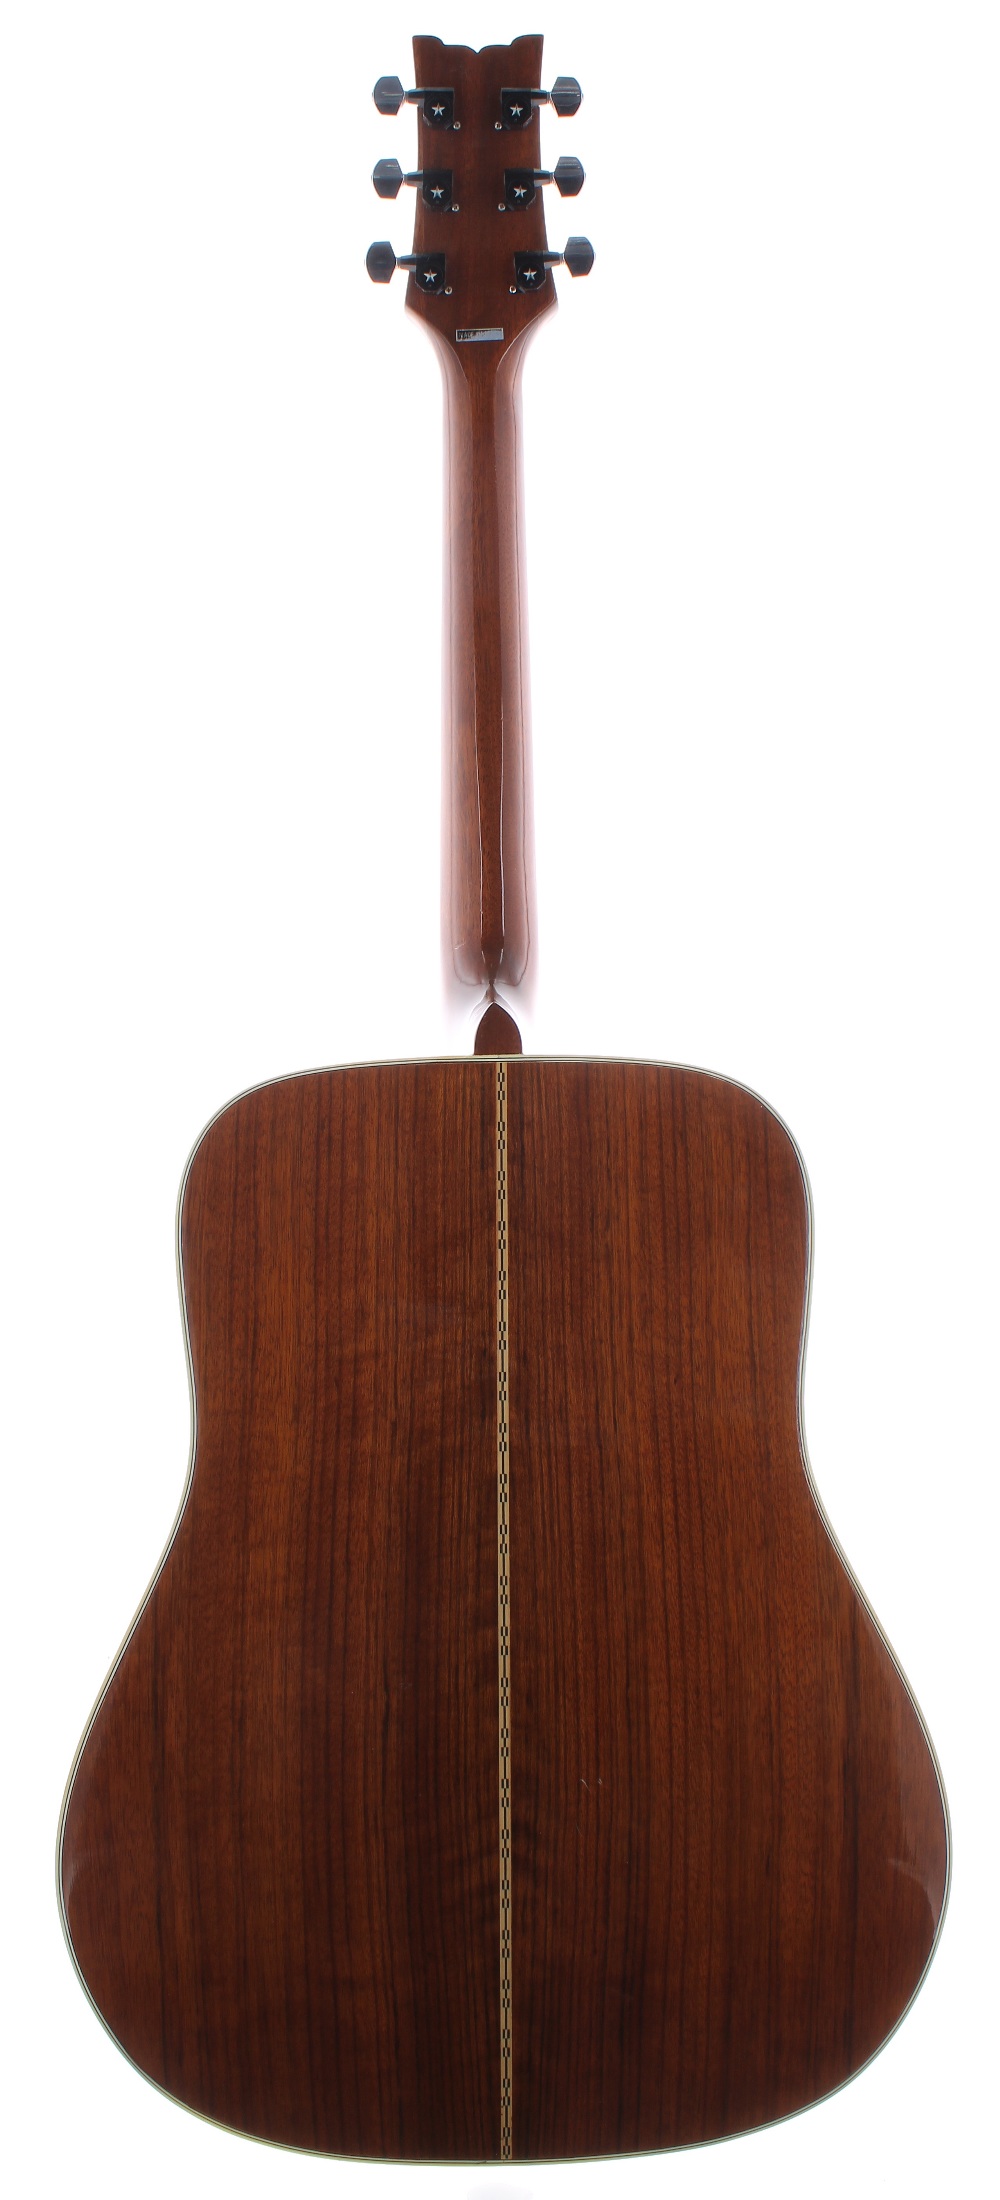 1976 Ibanez Artist Model 2608 acoustic guitar, made in Japan; Back and sides: rosewood, minor - Image 2 of 2